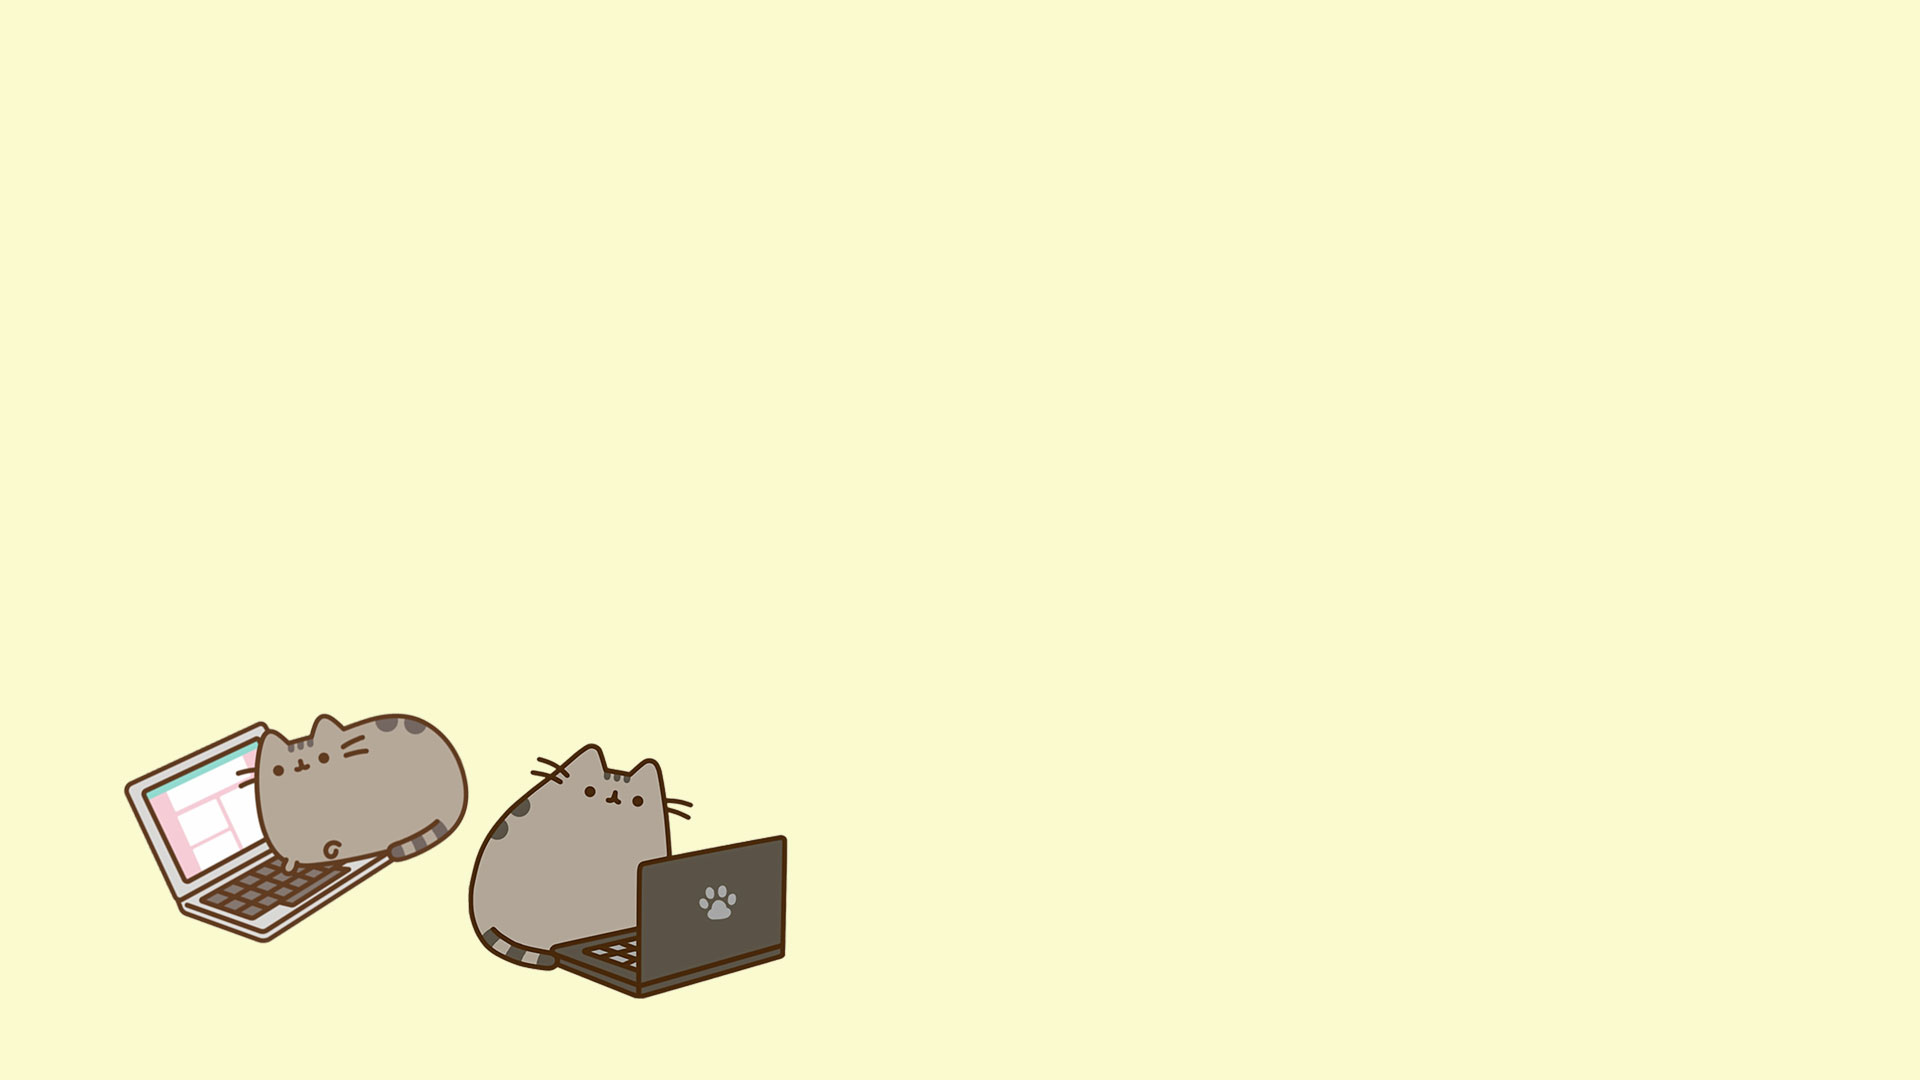 Pusheen Cat Wallpapers HD - New Tab Themes & Backgrounds